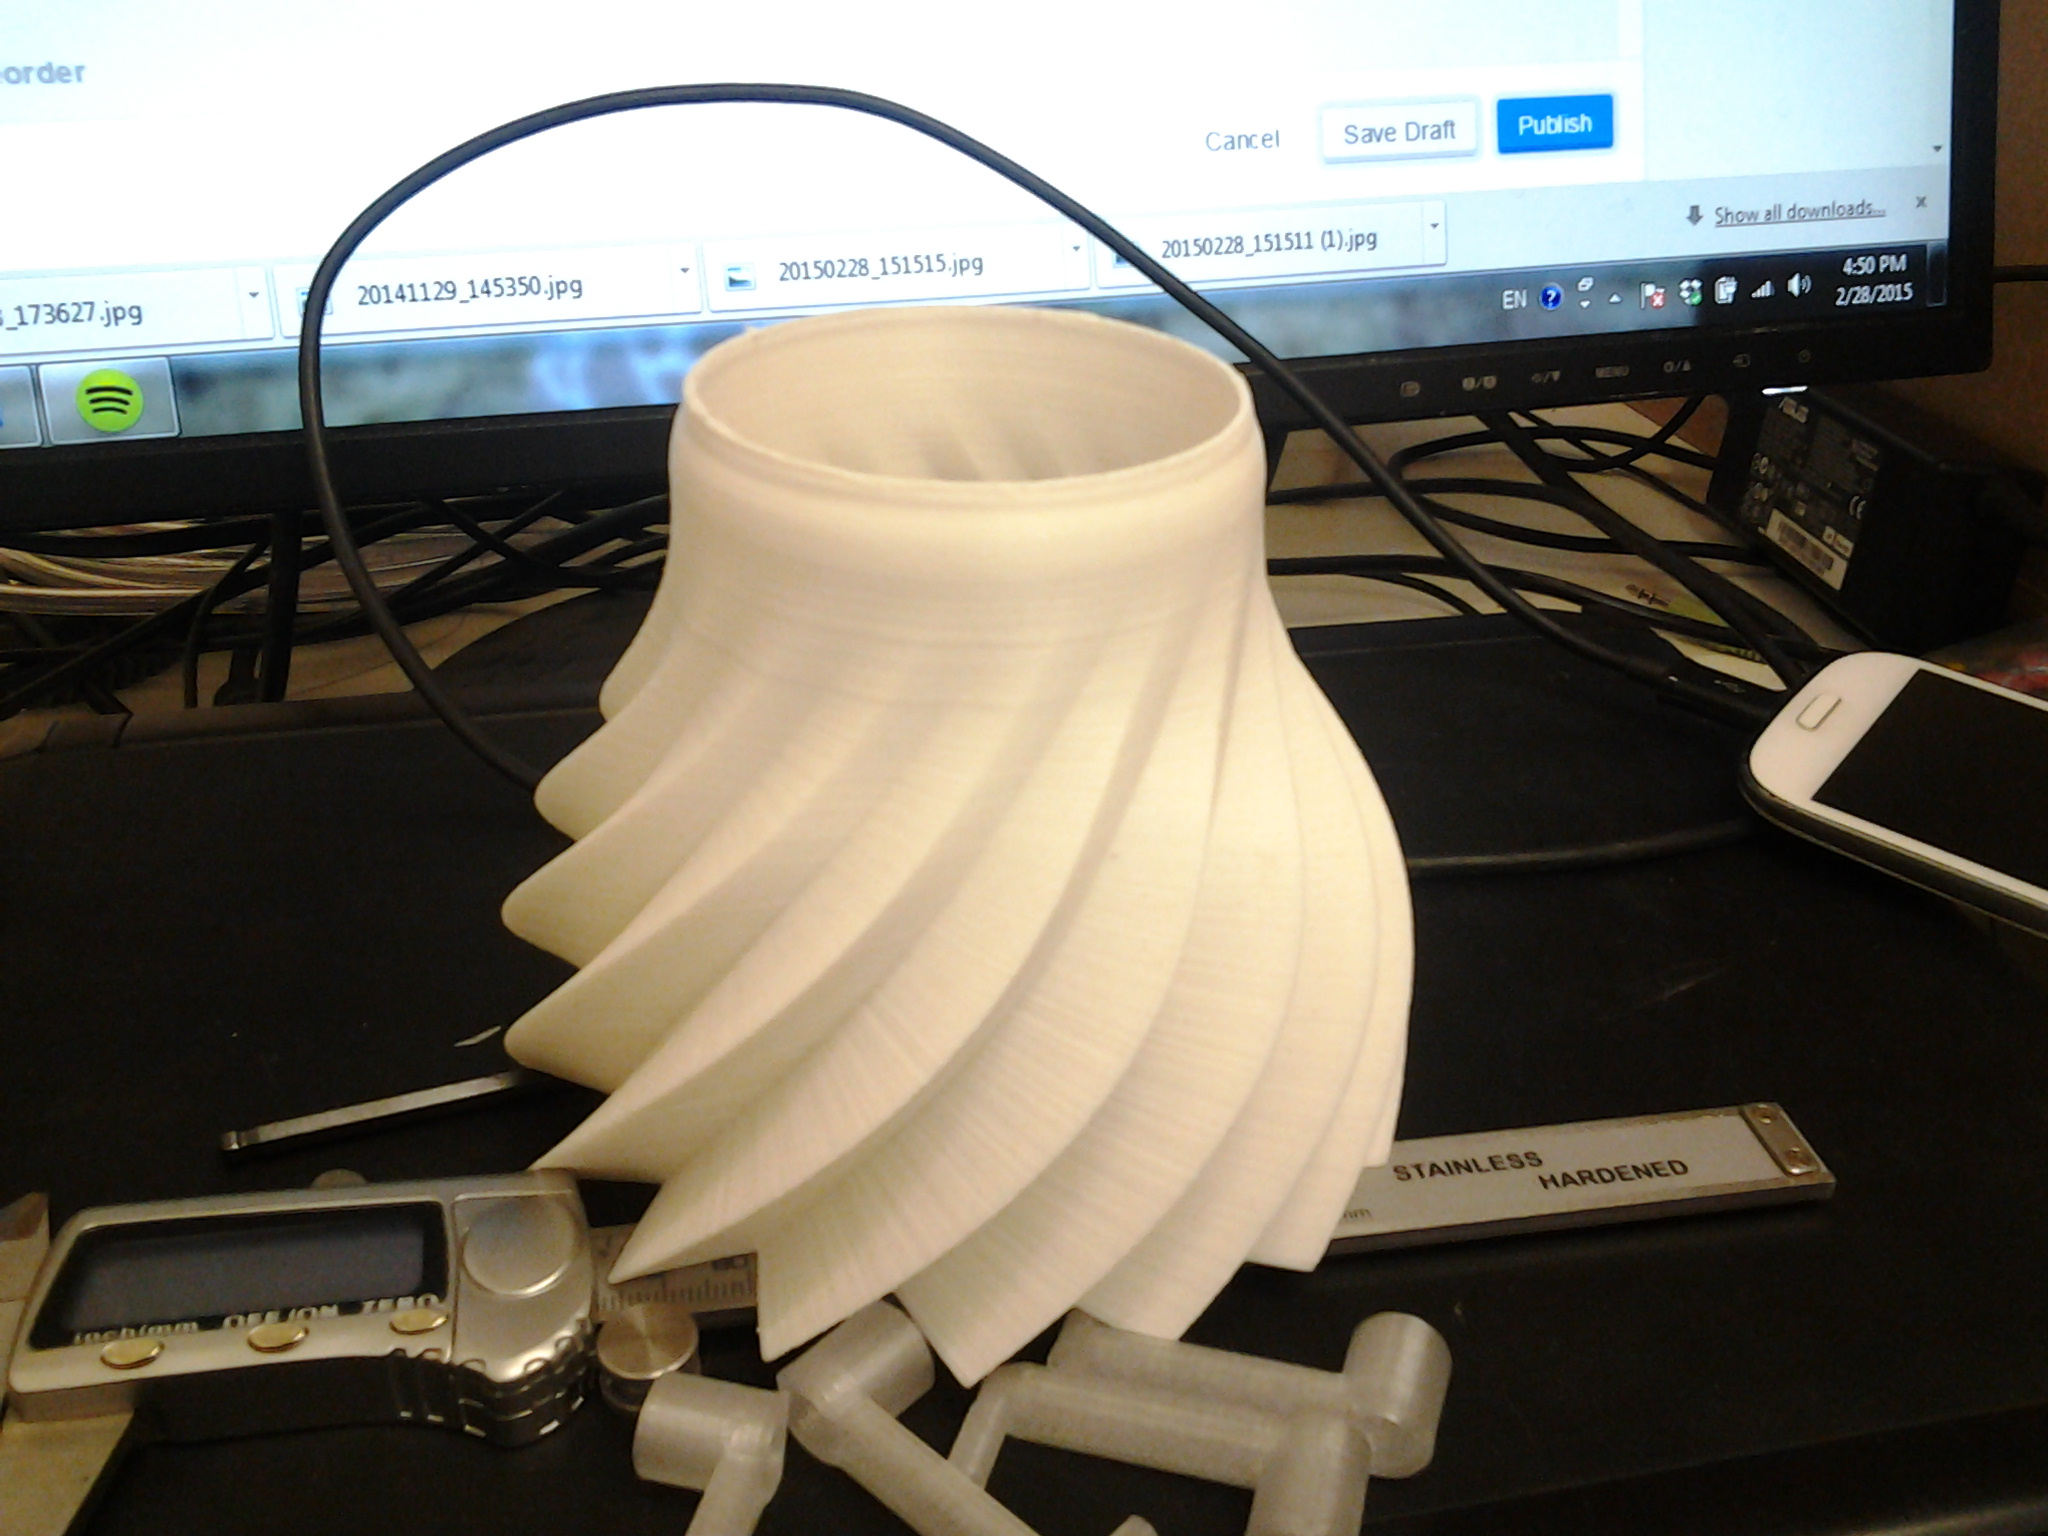 Lamp shade for a desk lamp. 2 versions, straight and swirled.